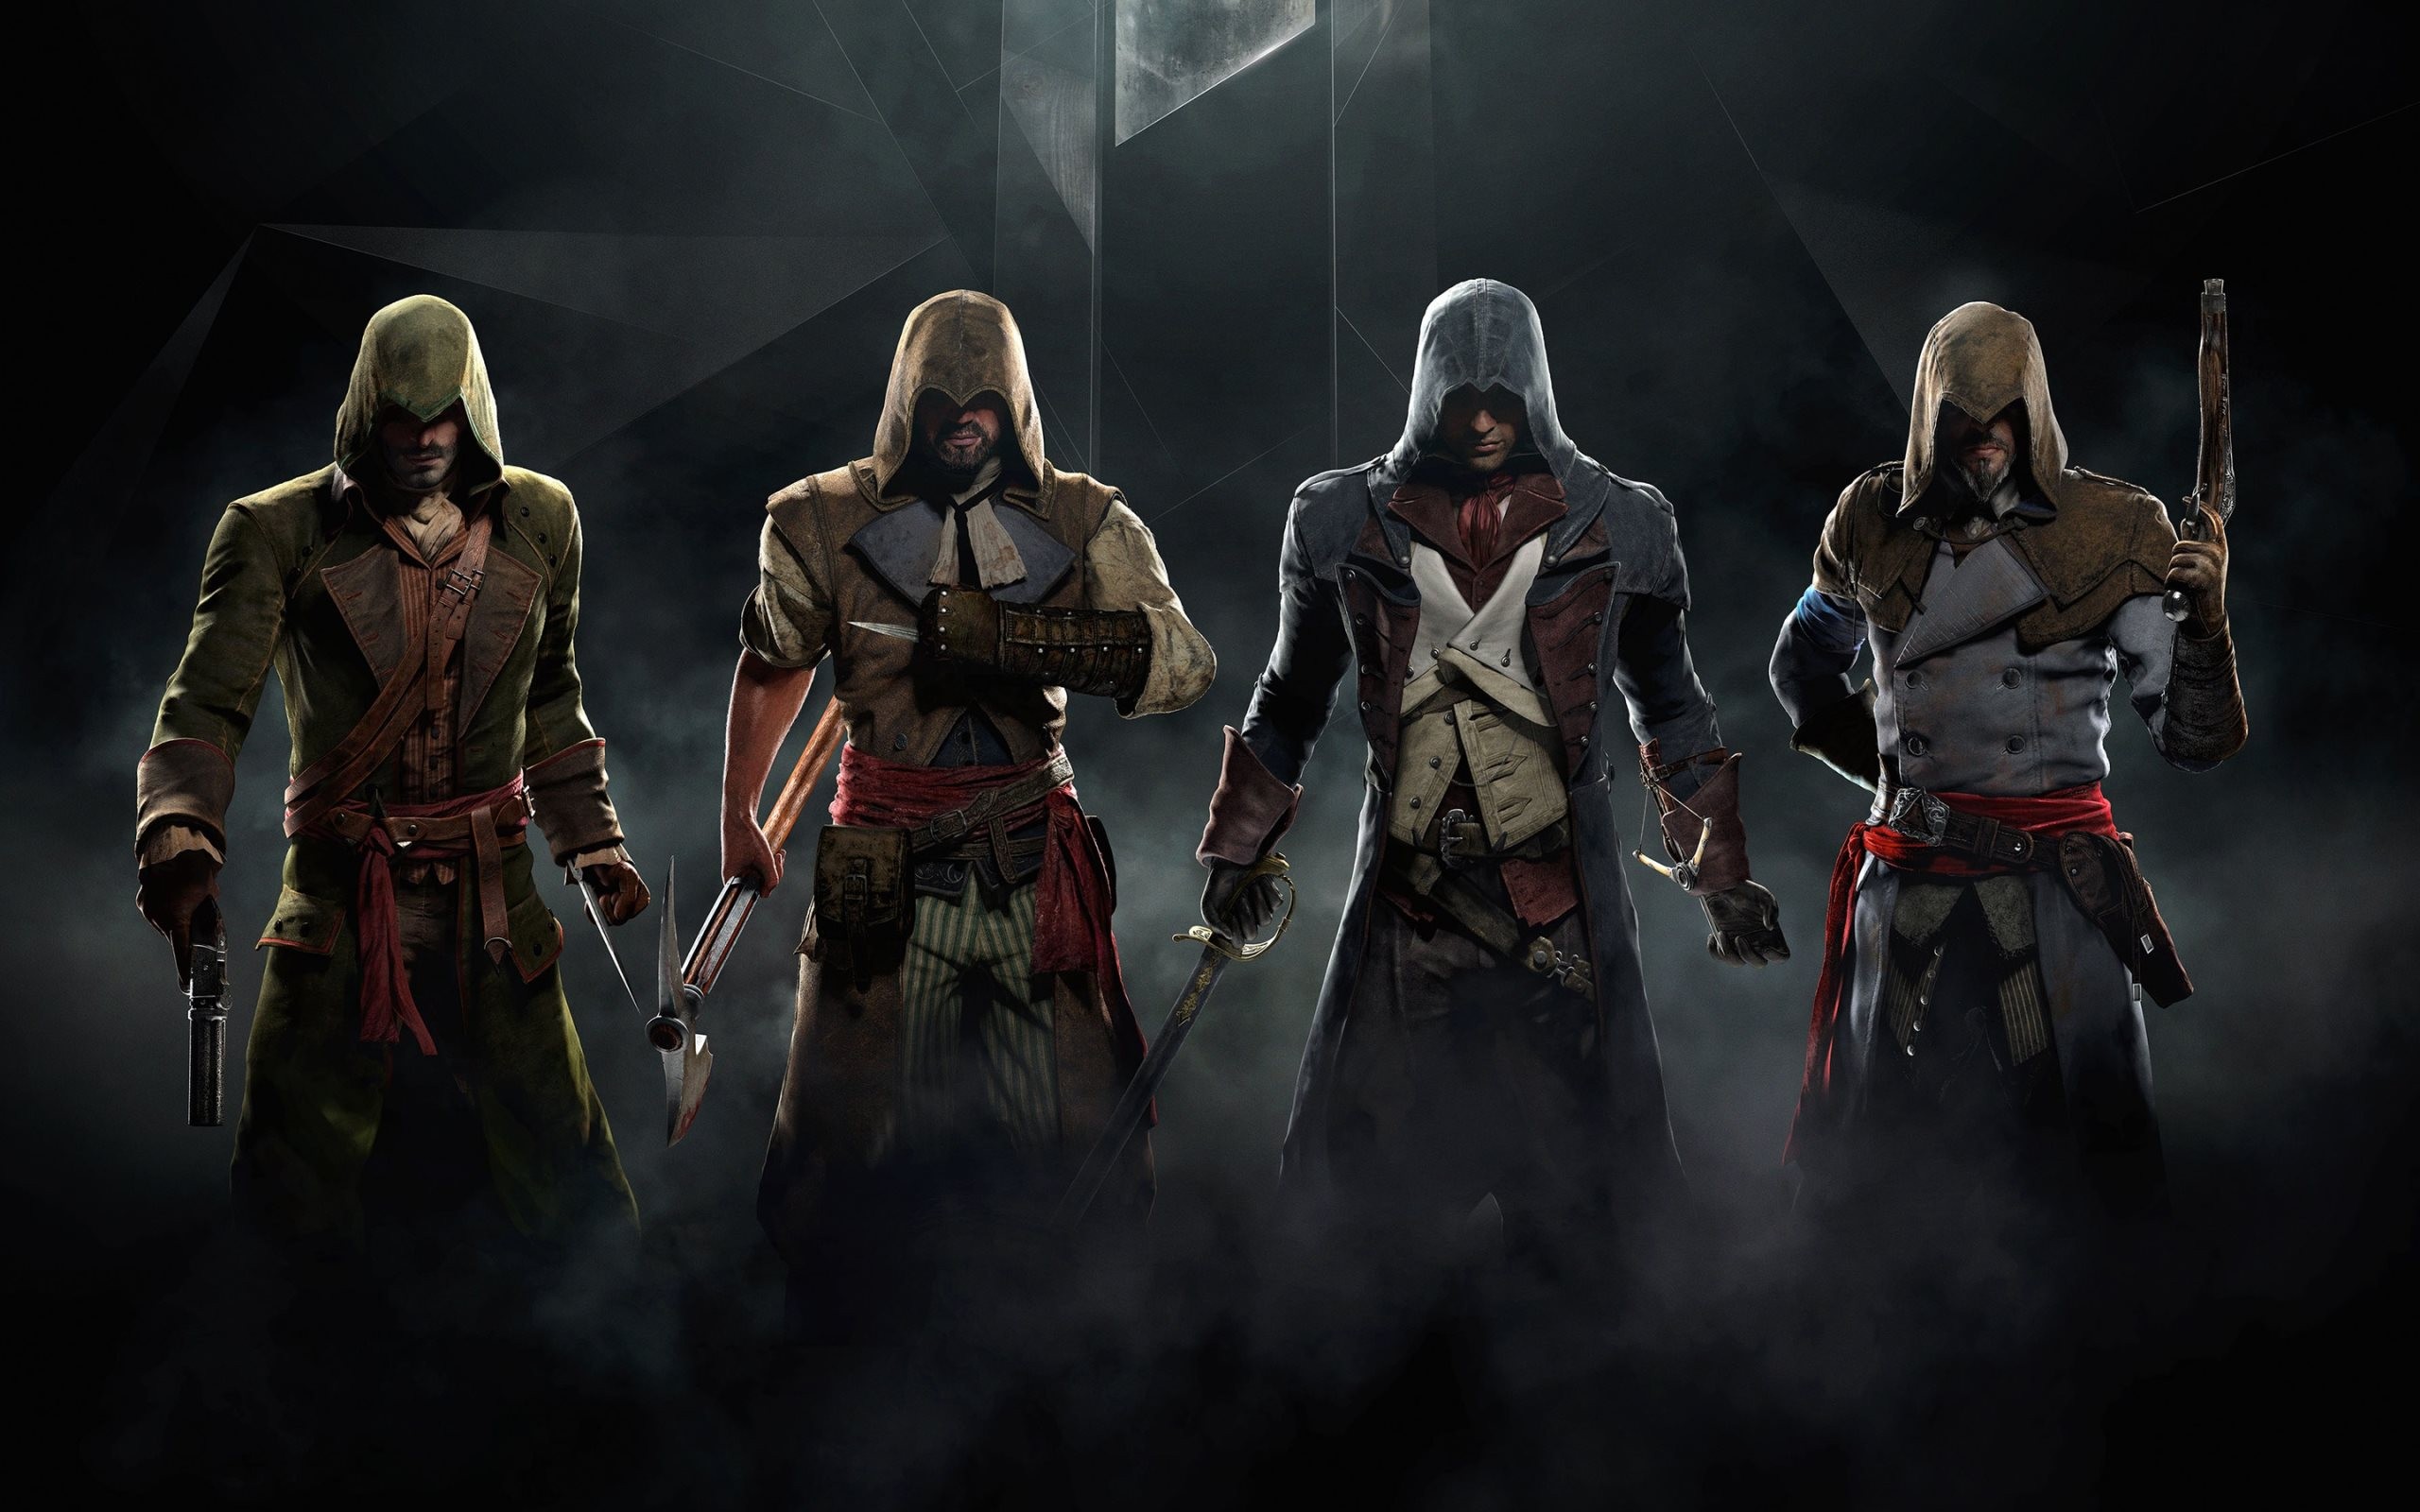 General 2560x1600 video games Video Game Heroes Assassin's Creed Ubisoft video game characters video game art video game men PC gaming gun axes sword hoods Assassin's Creed Syndicate